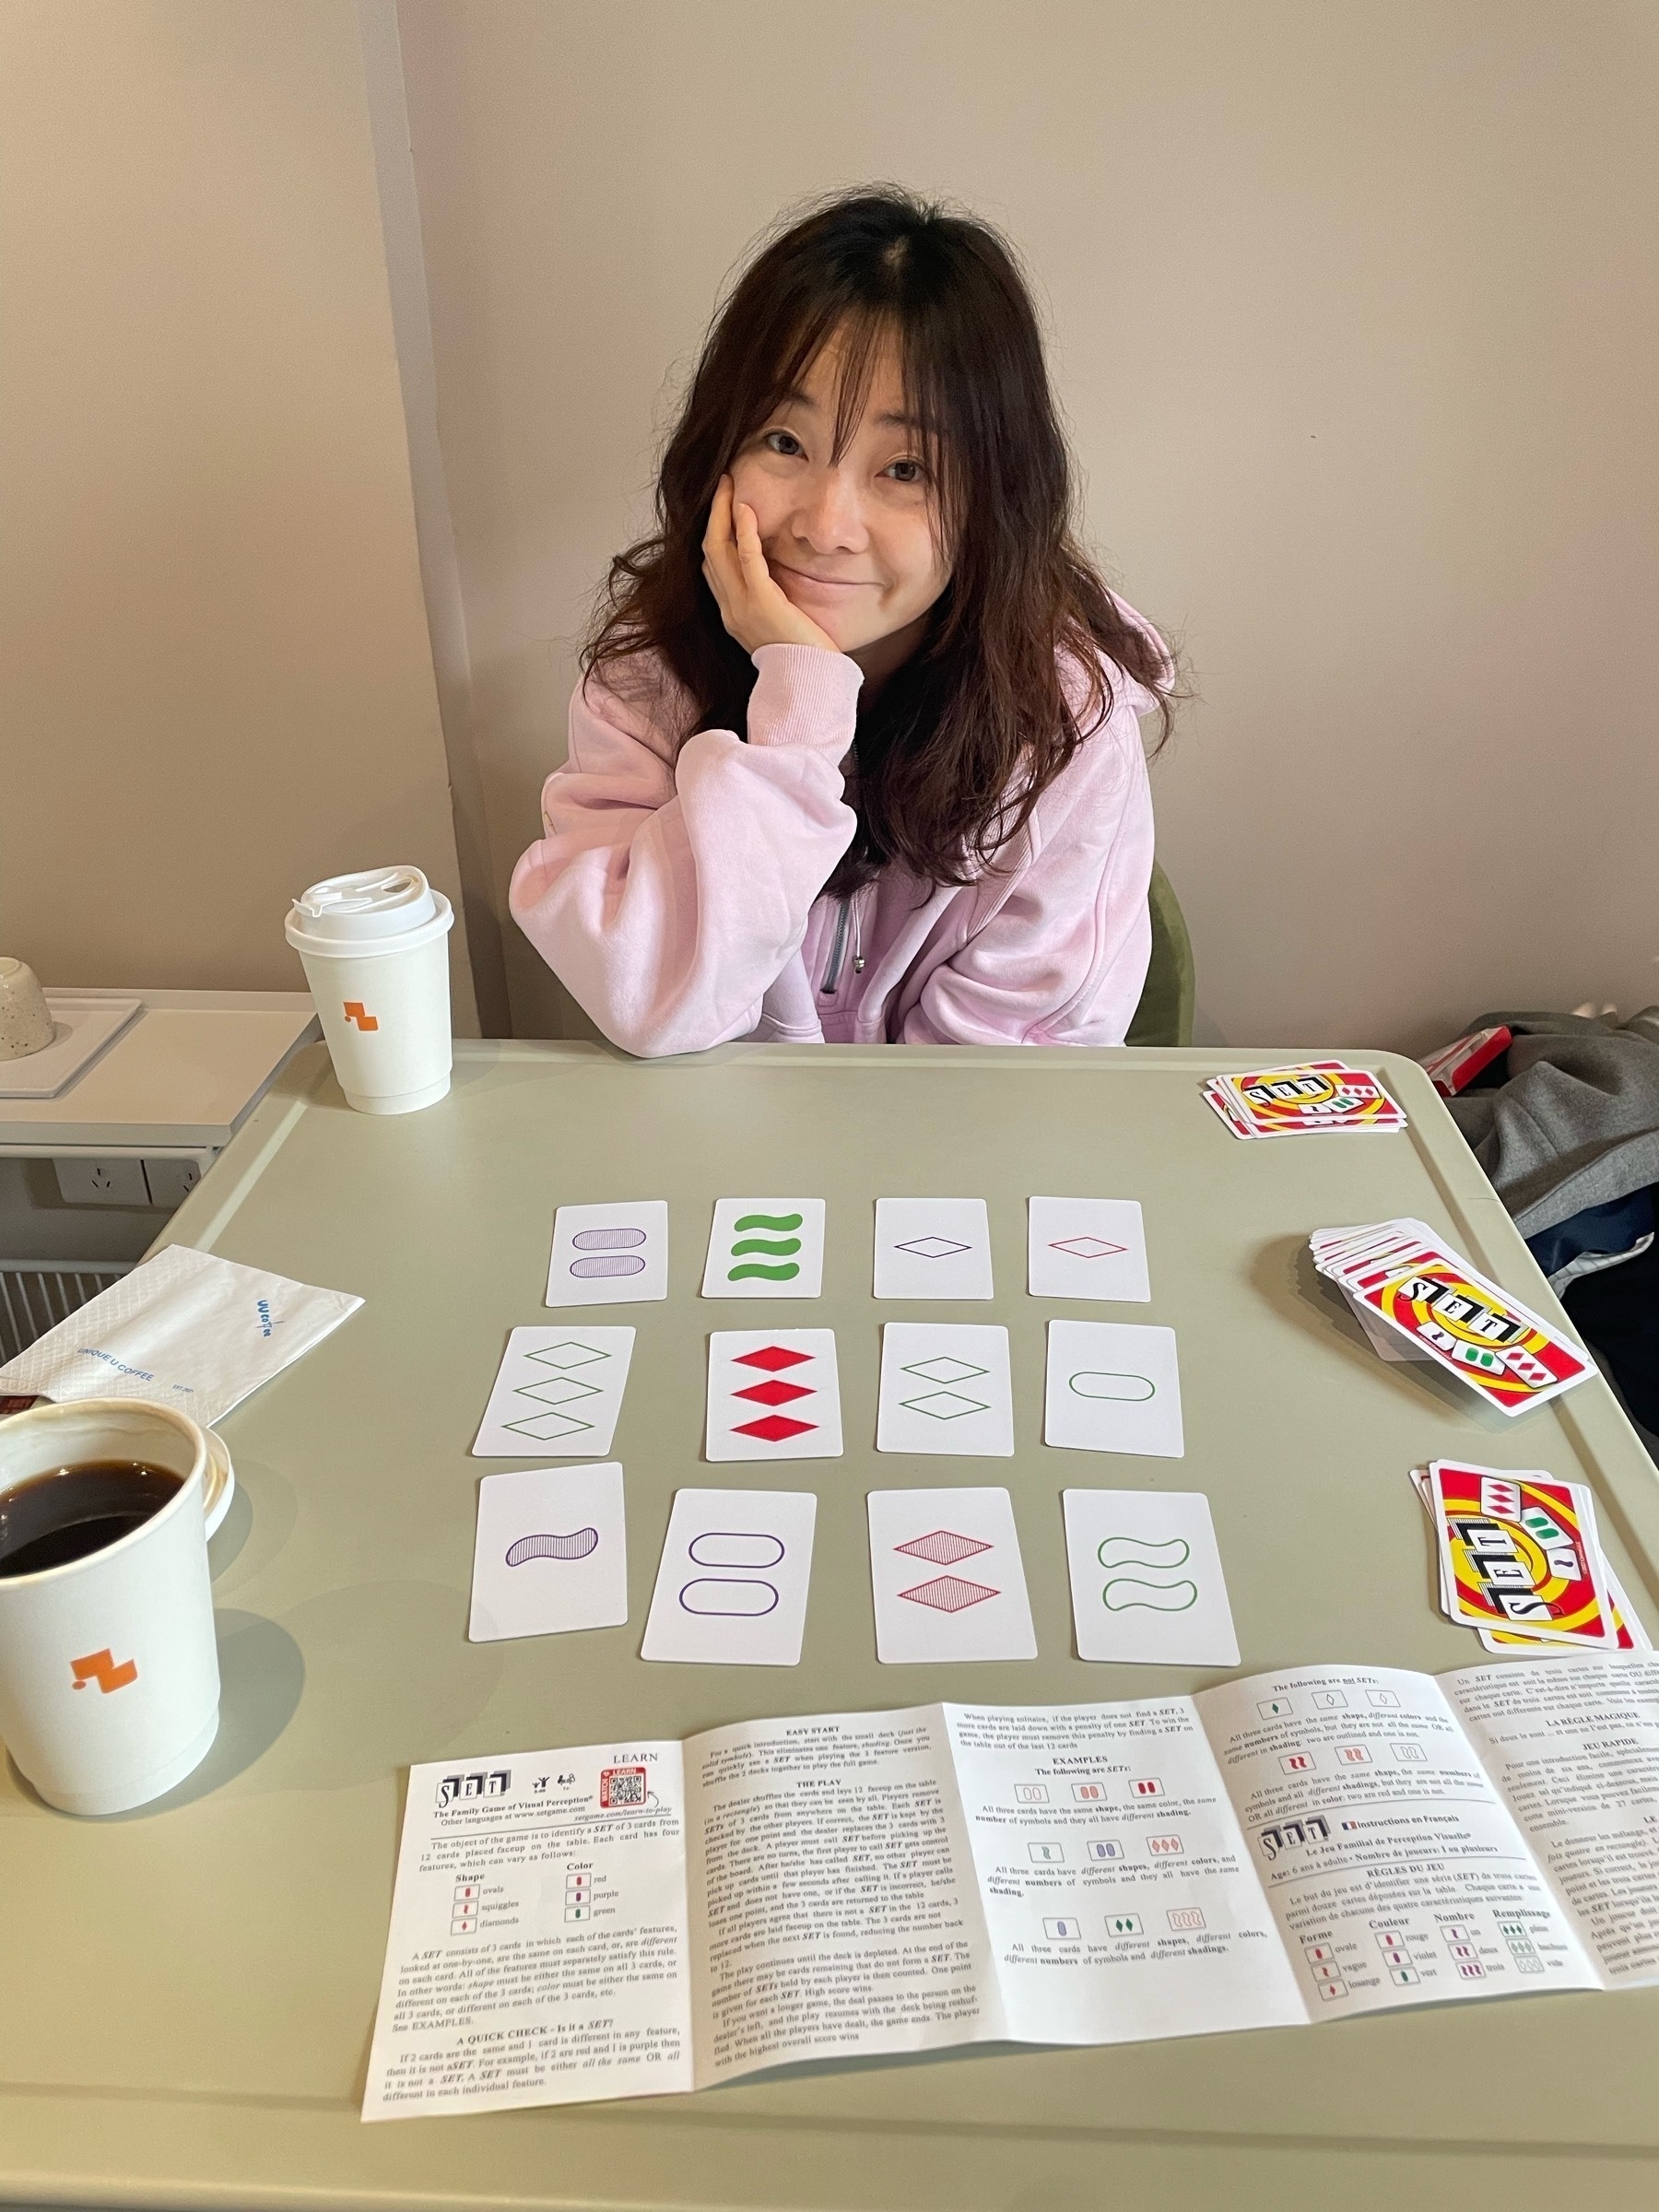 Lady smiling sat behind a table with cards on